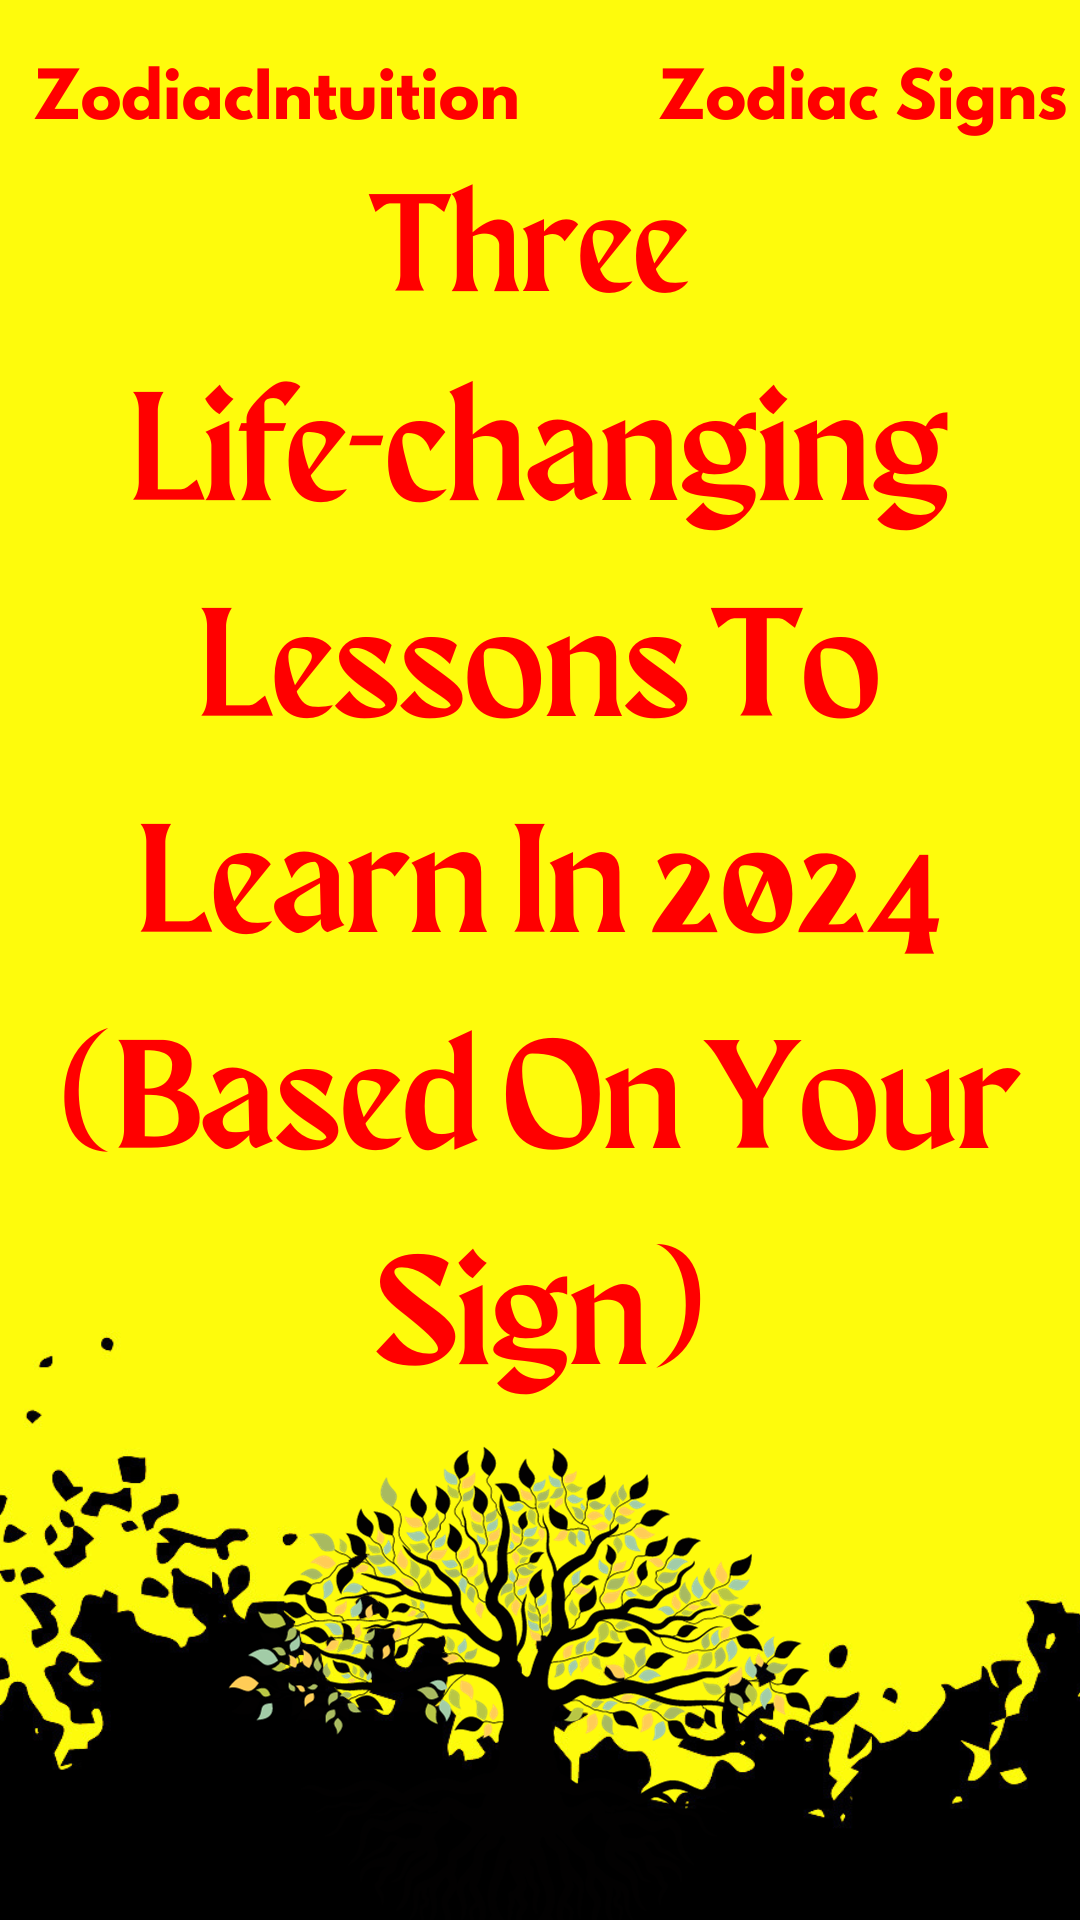 Three Life-changing Lessons To Learn In 2024 (Based On Your Sign)